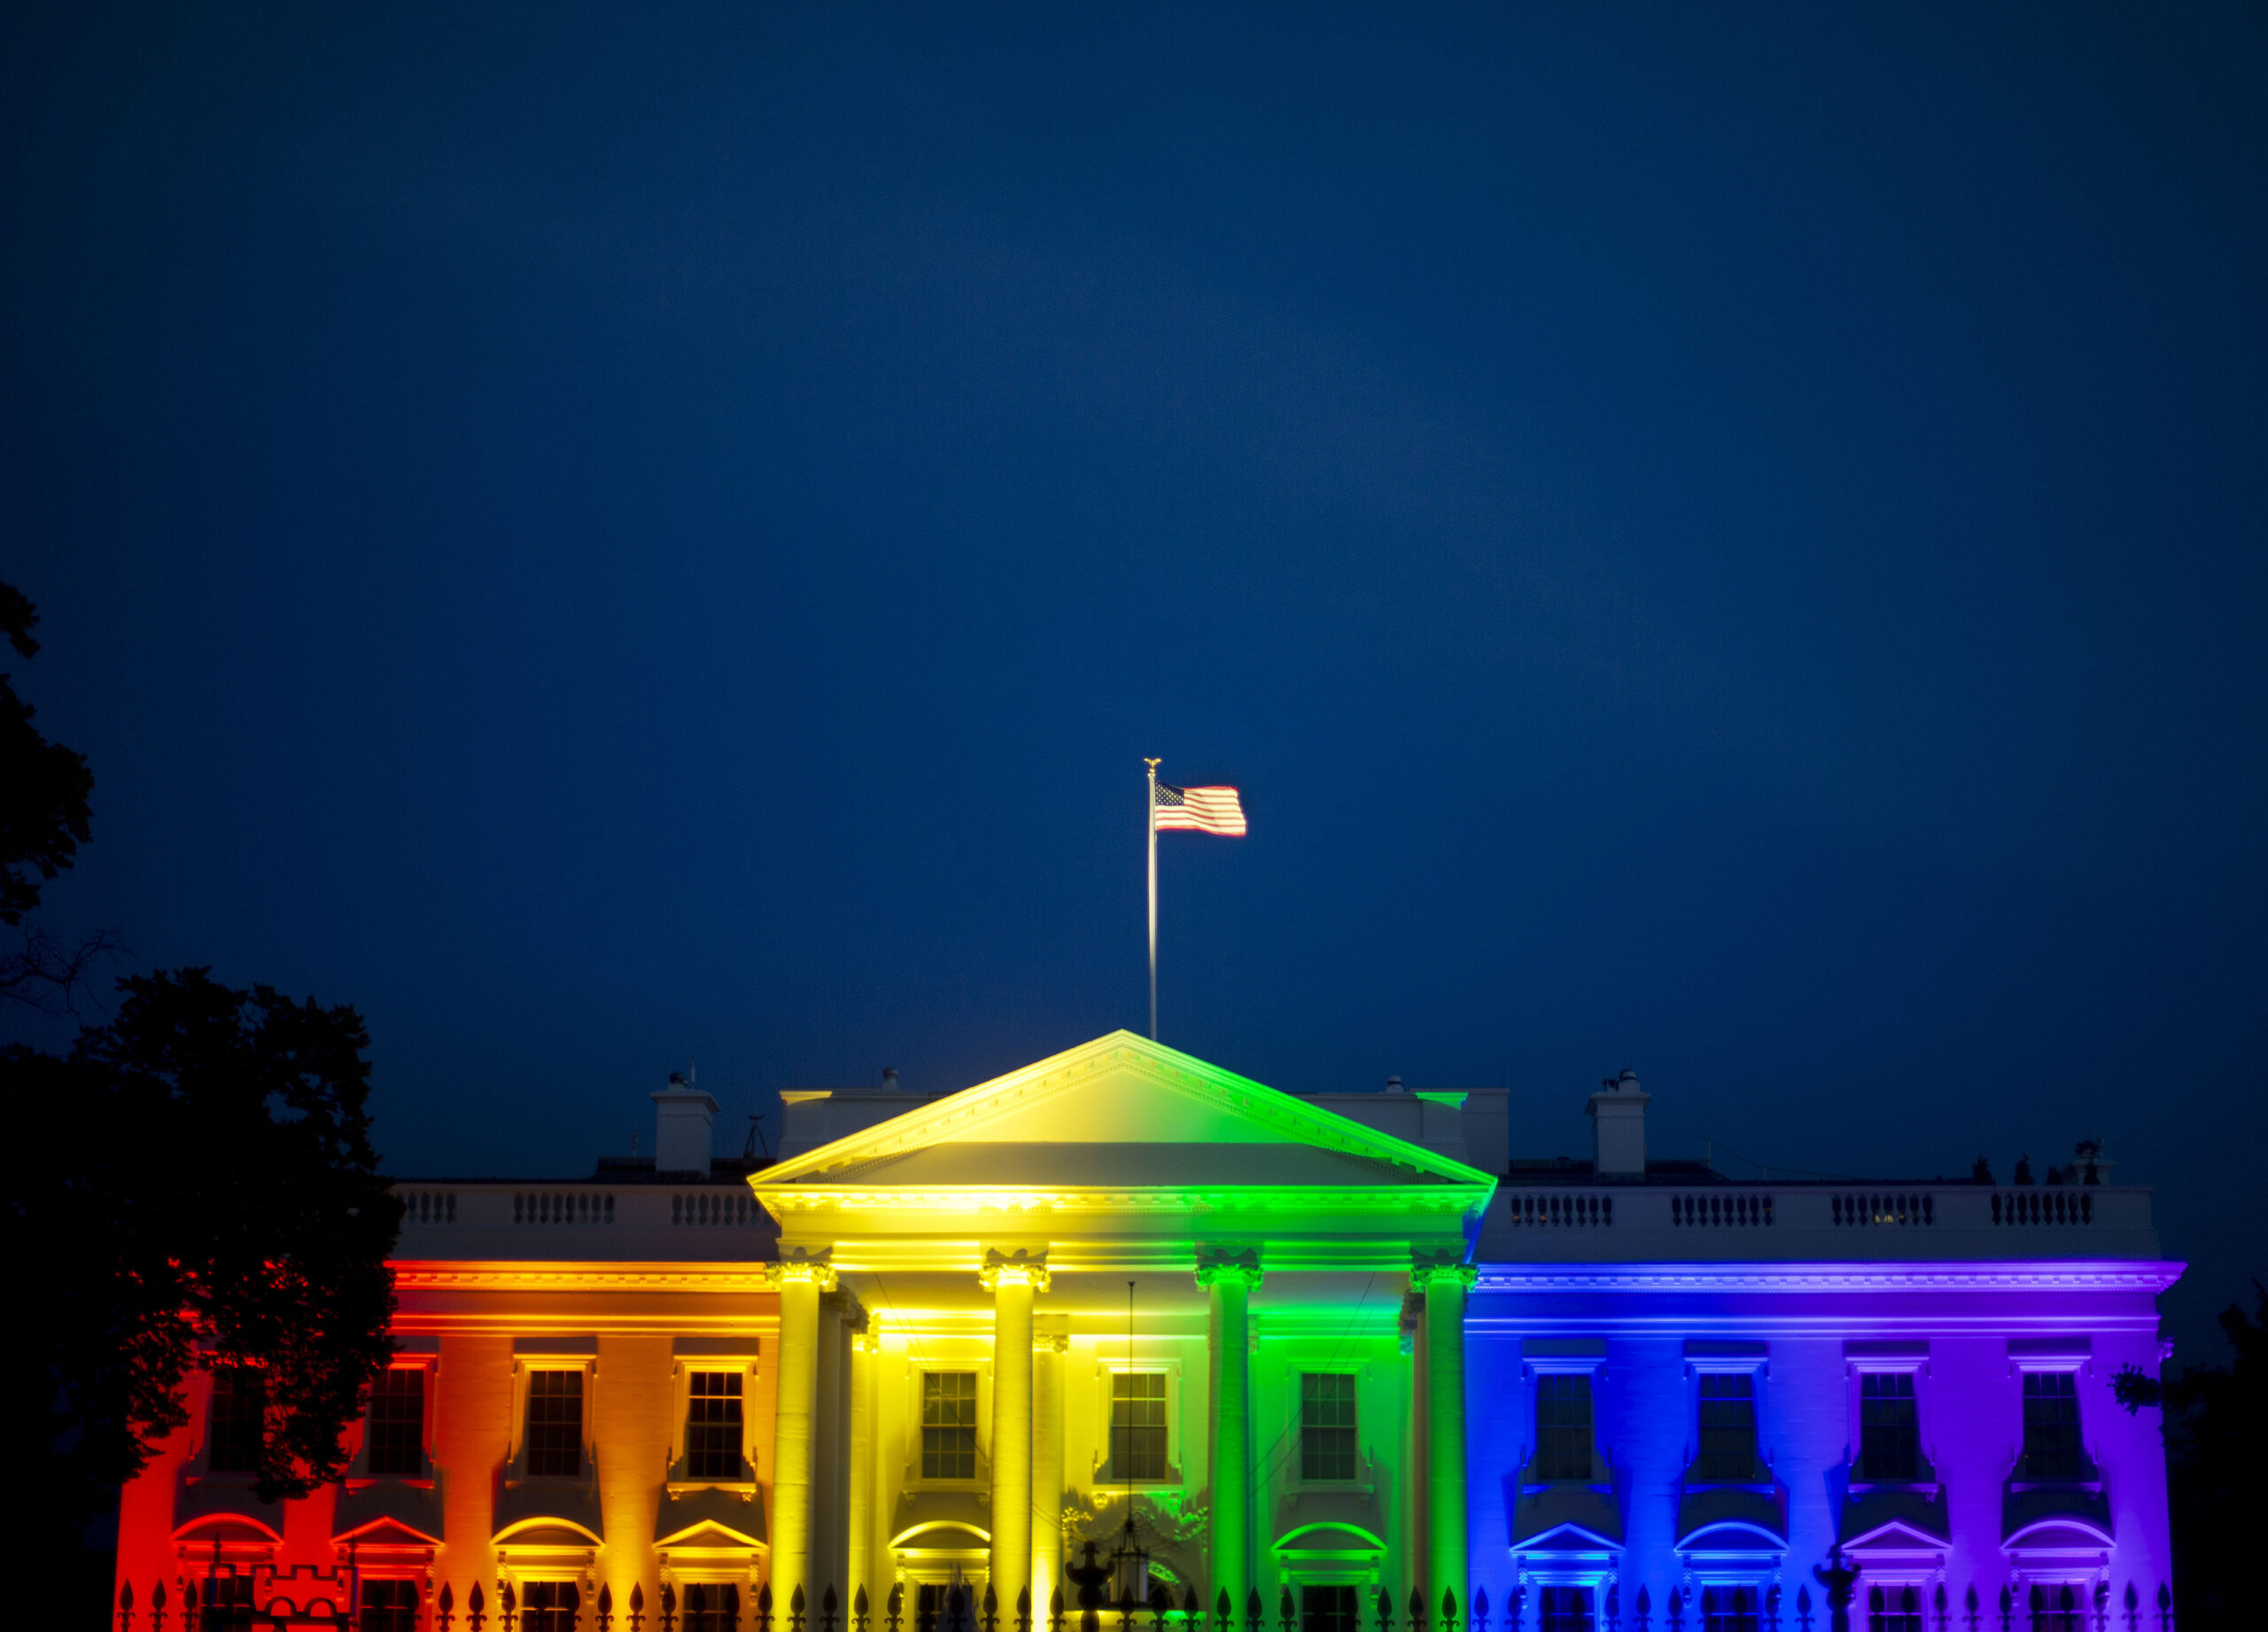 The White House in Washington, is lit up in rainbow colors in commemoration of the Supreme Court's ruling to legalize same-sex marriage.